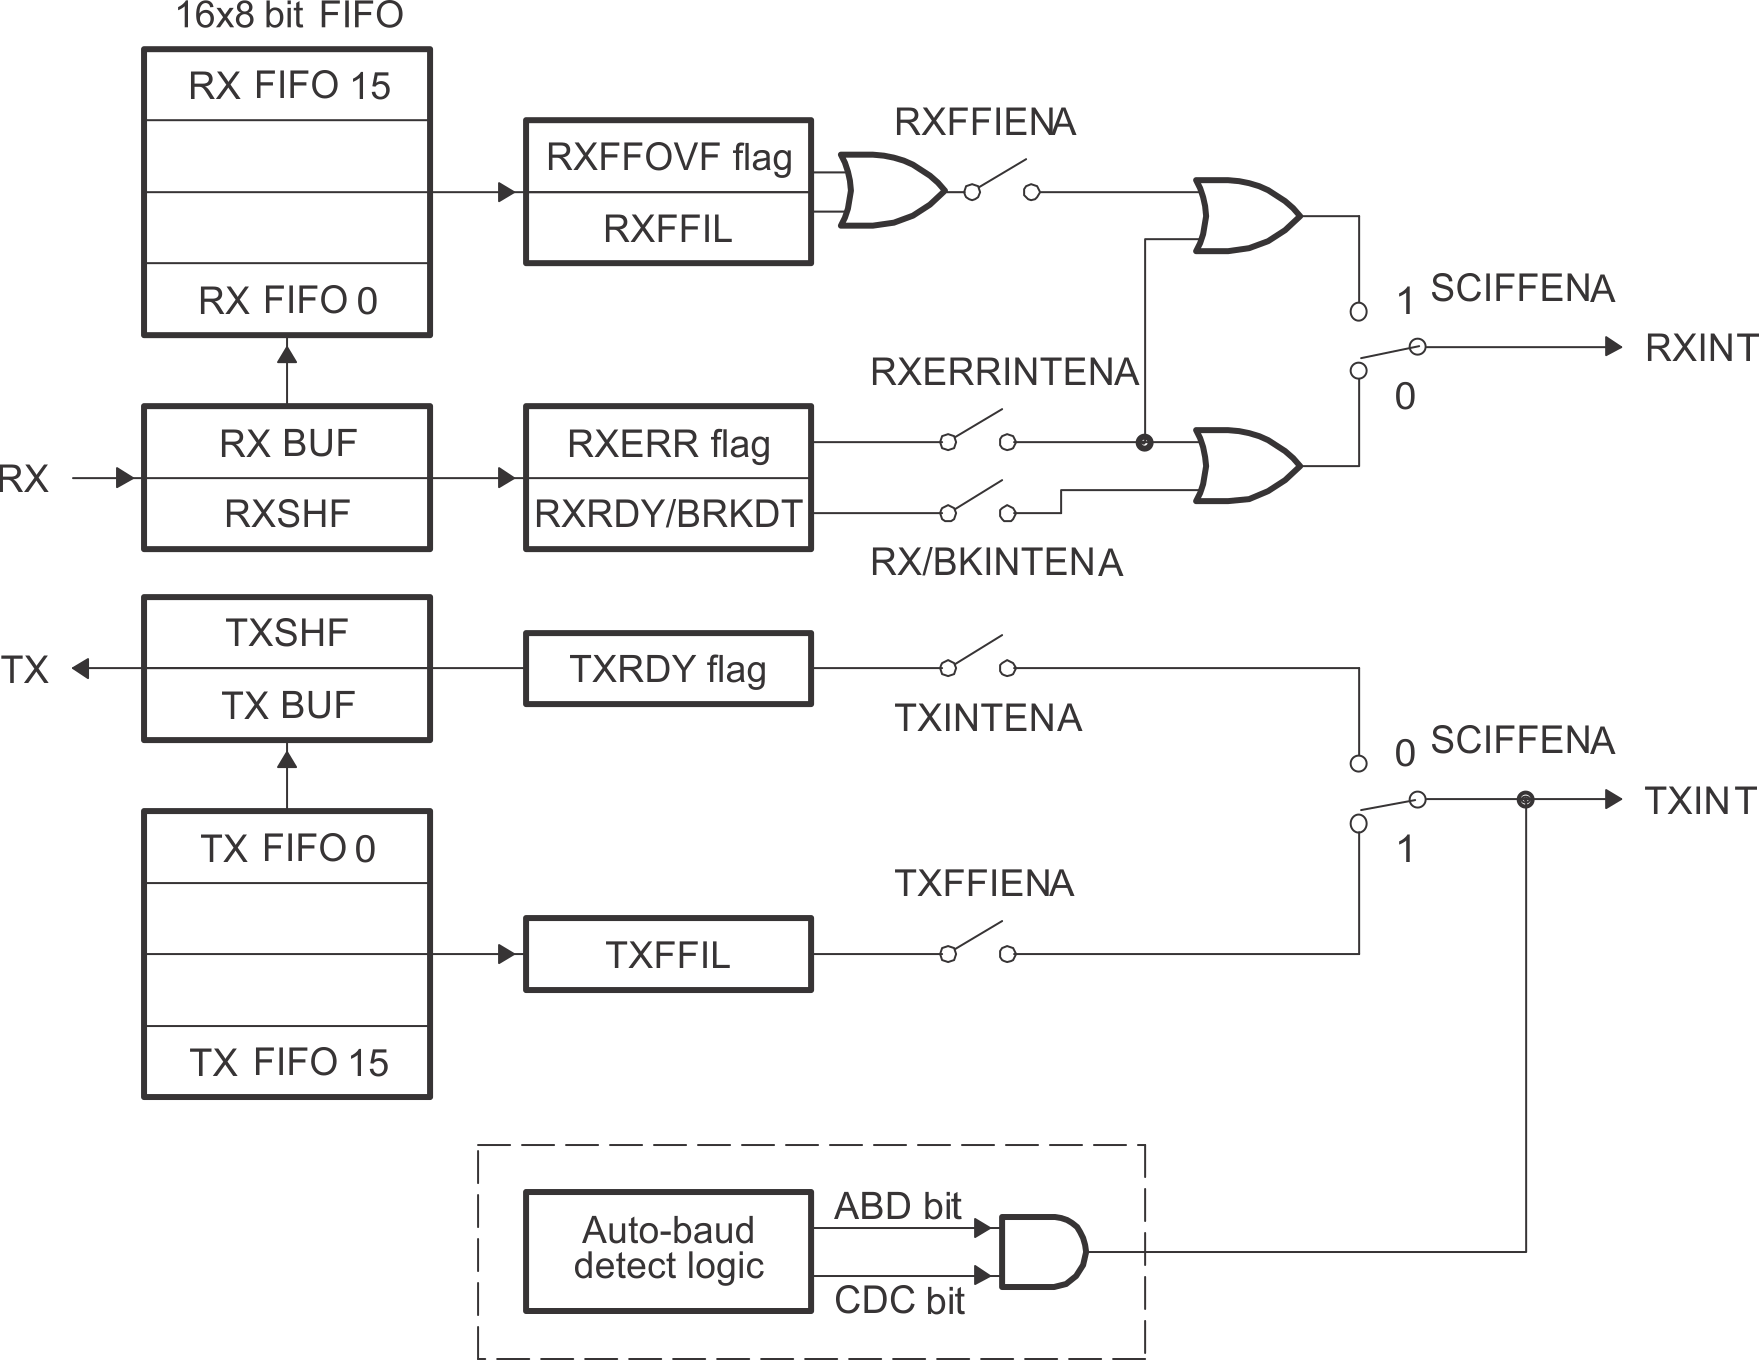  SCI FIFO
                    Interrupt Flags and Enable Logic